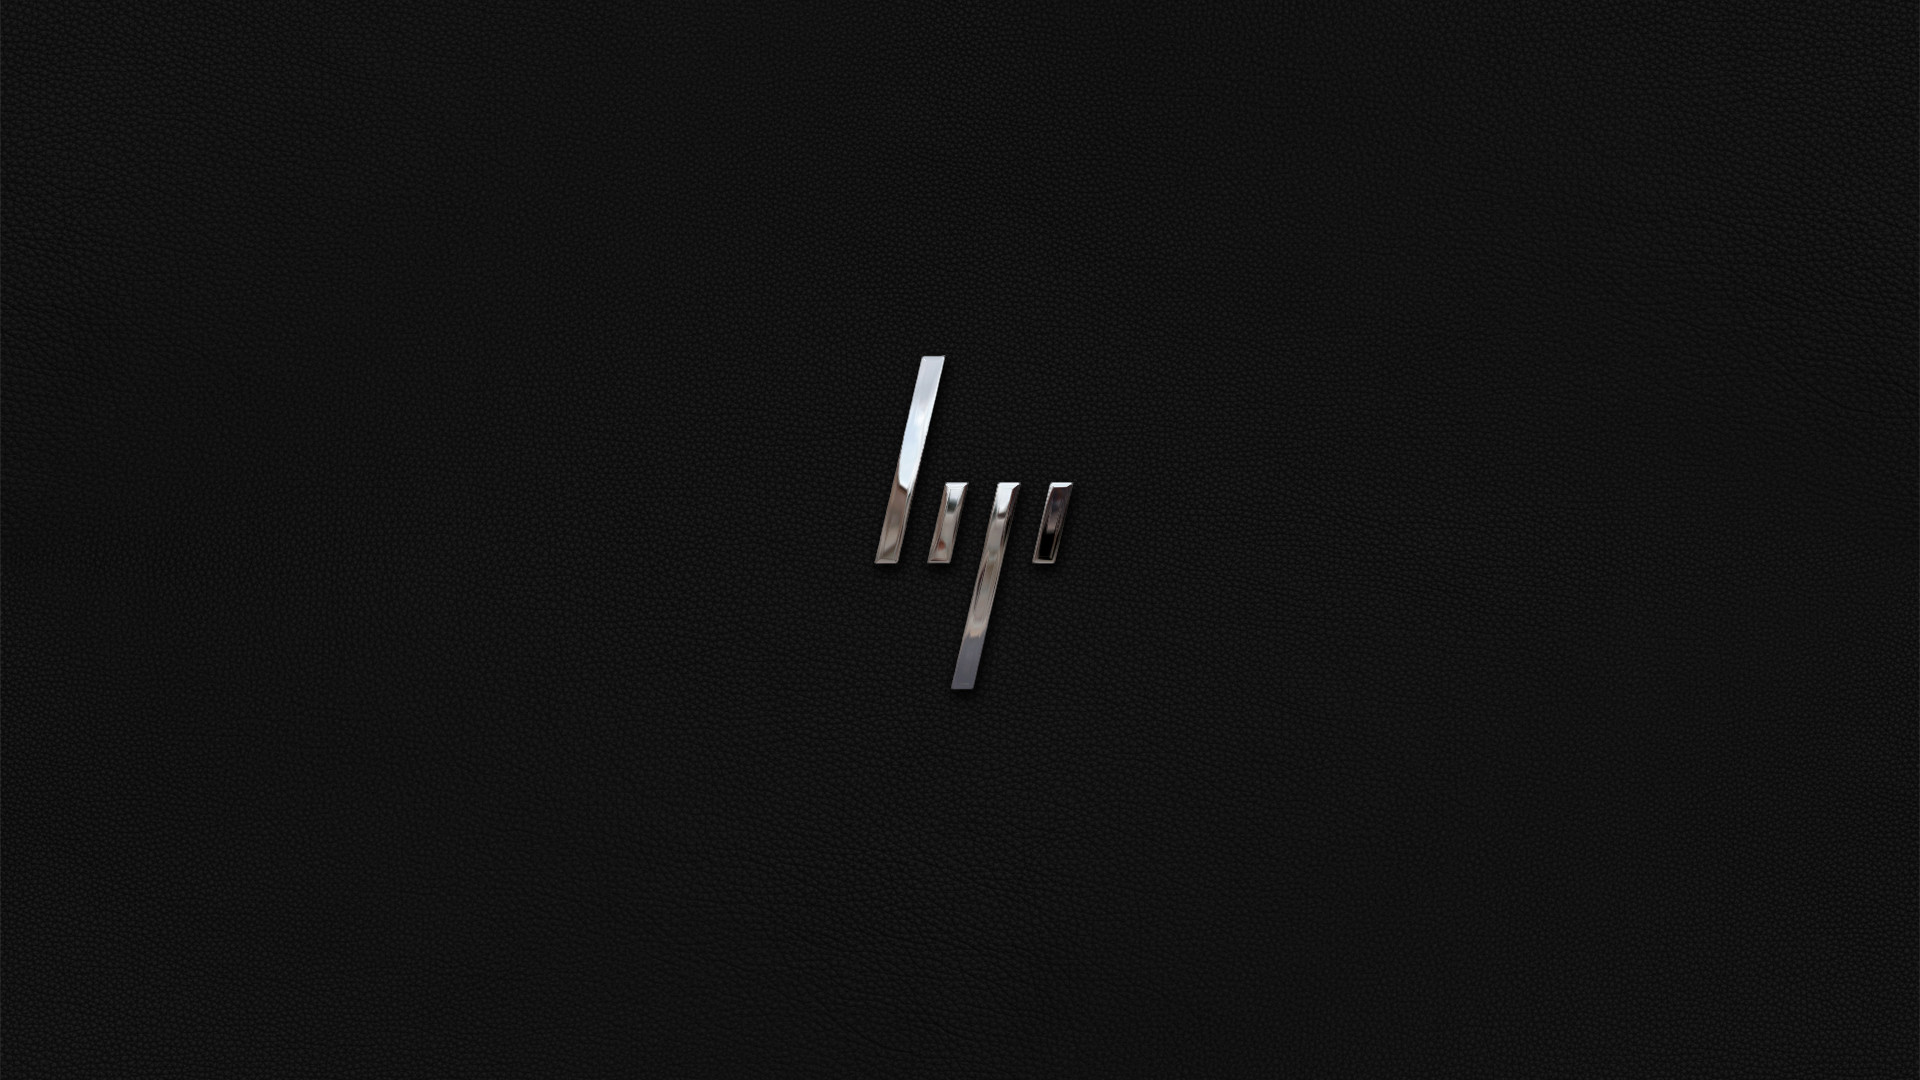 HP Logo Wallpaper (57+ pictures)